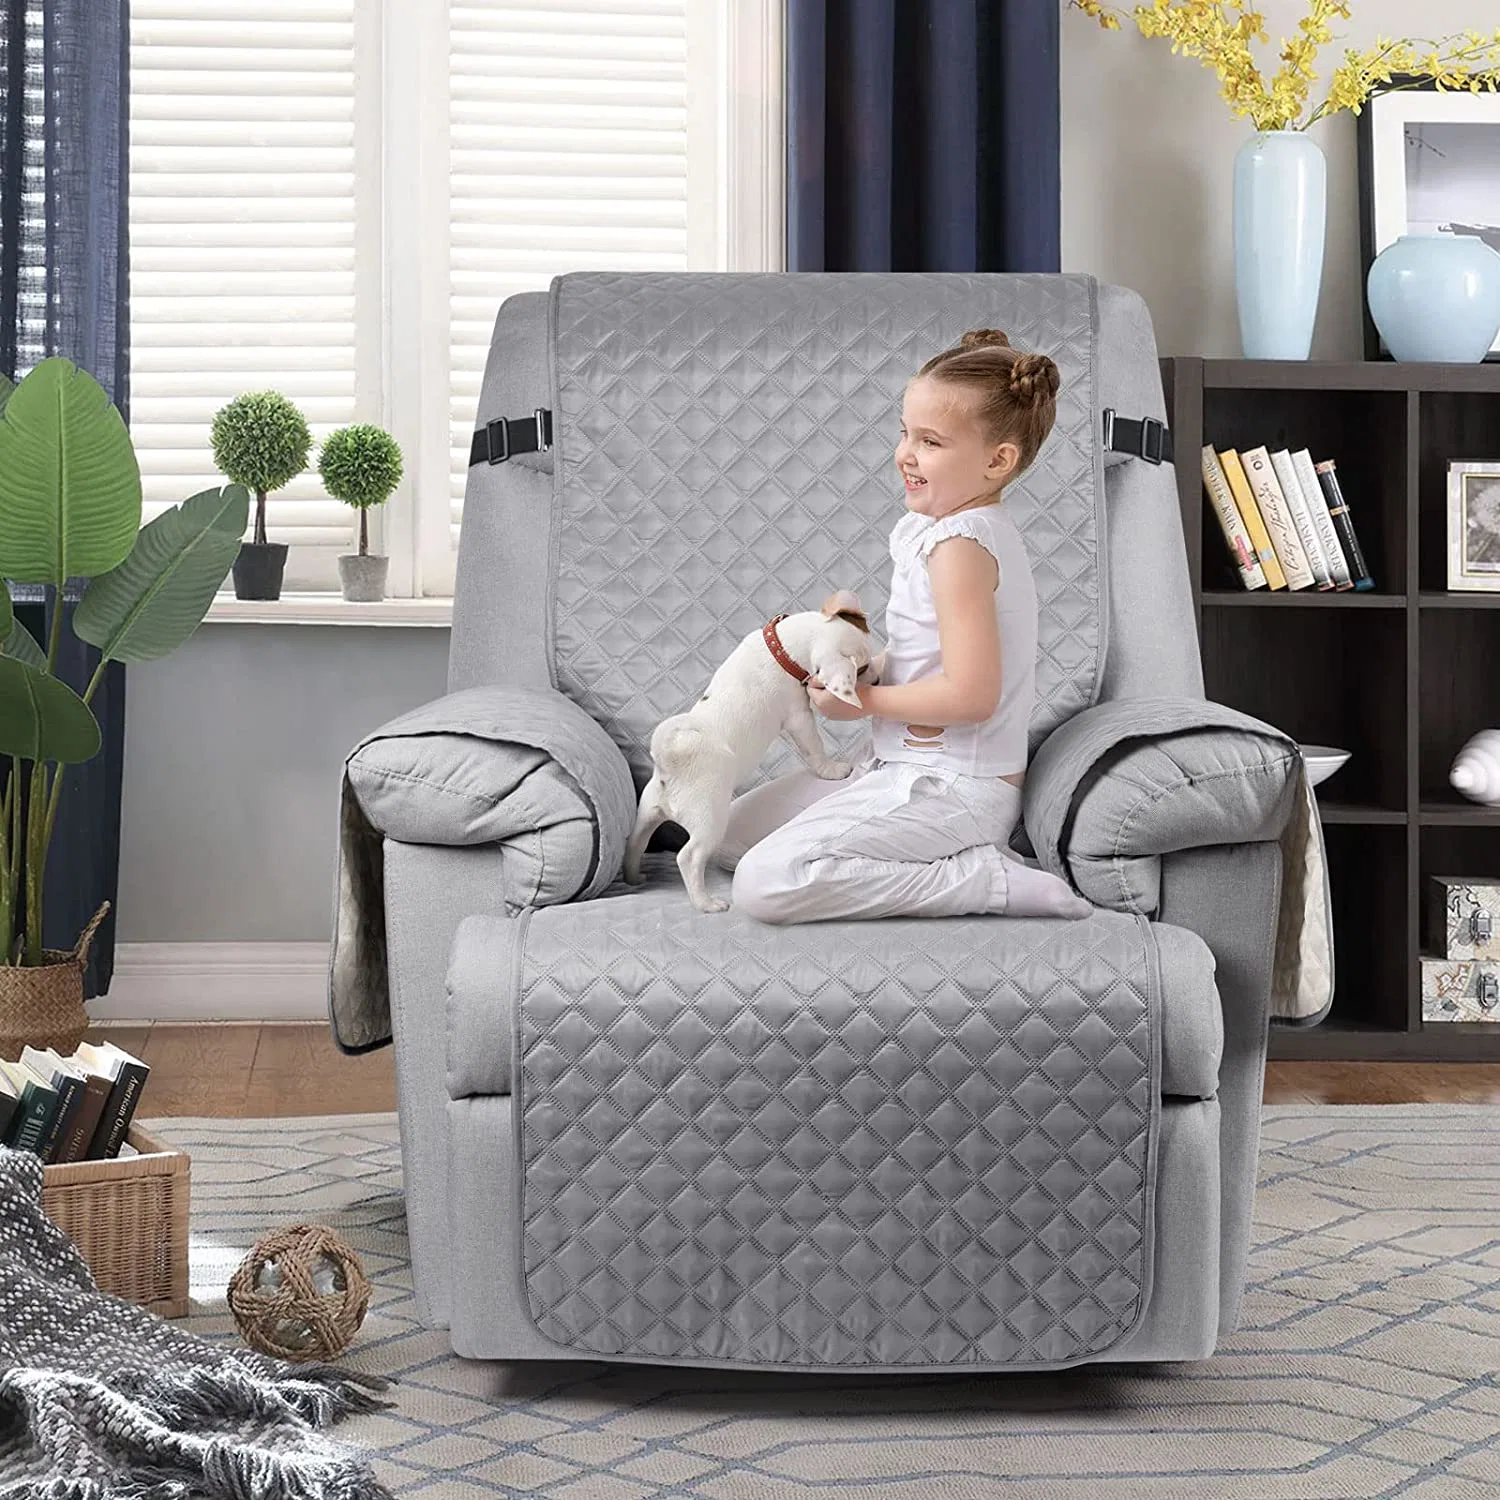 Washable Reclining Chair Cover with Elastic Straps